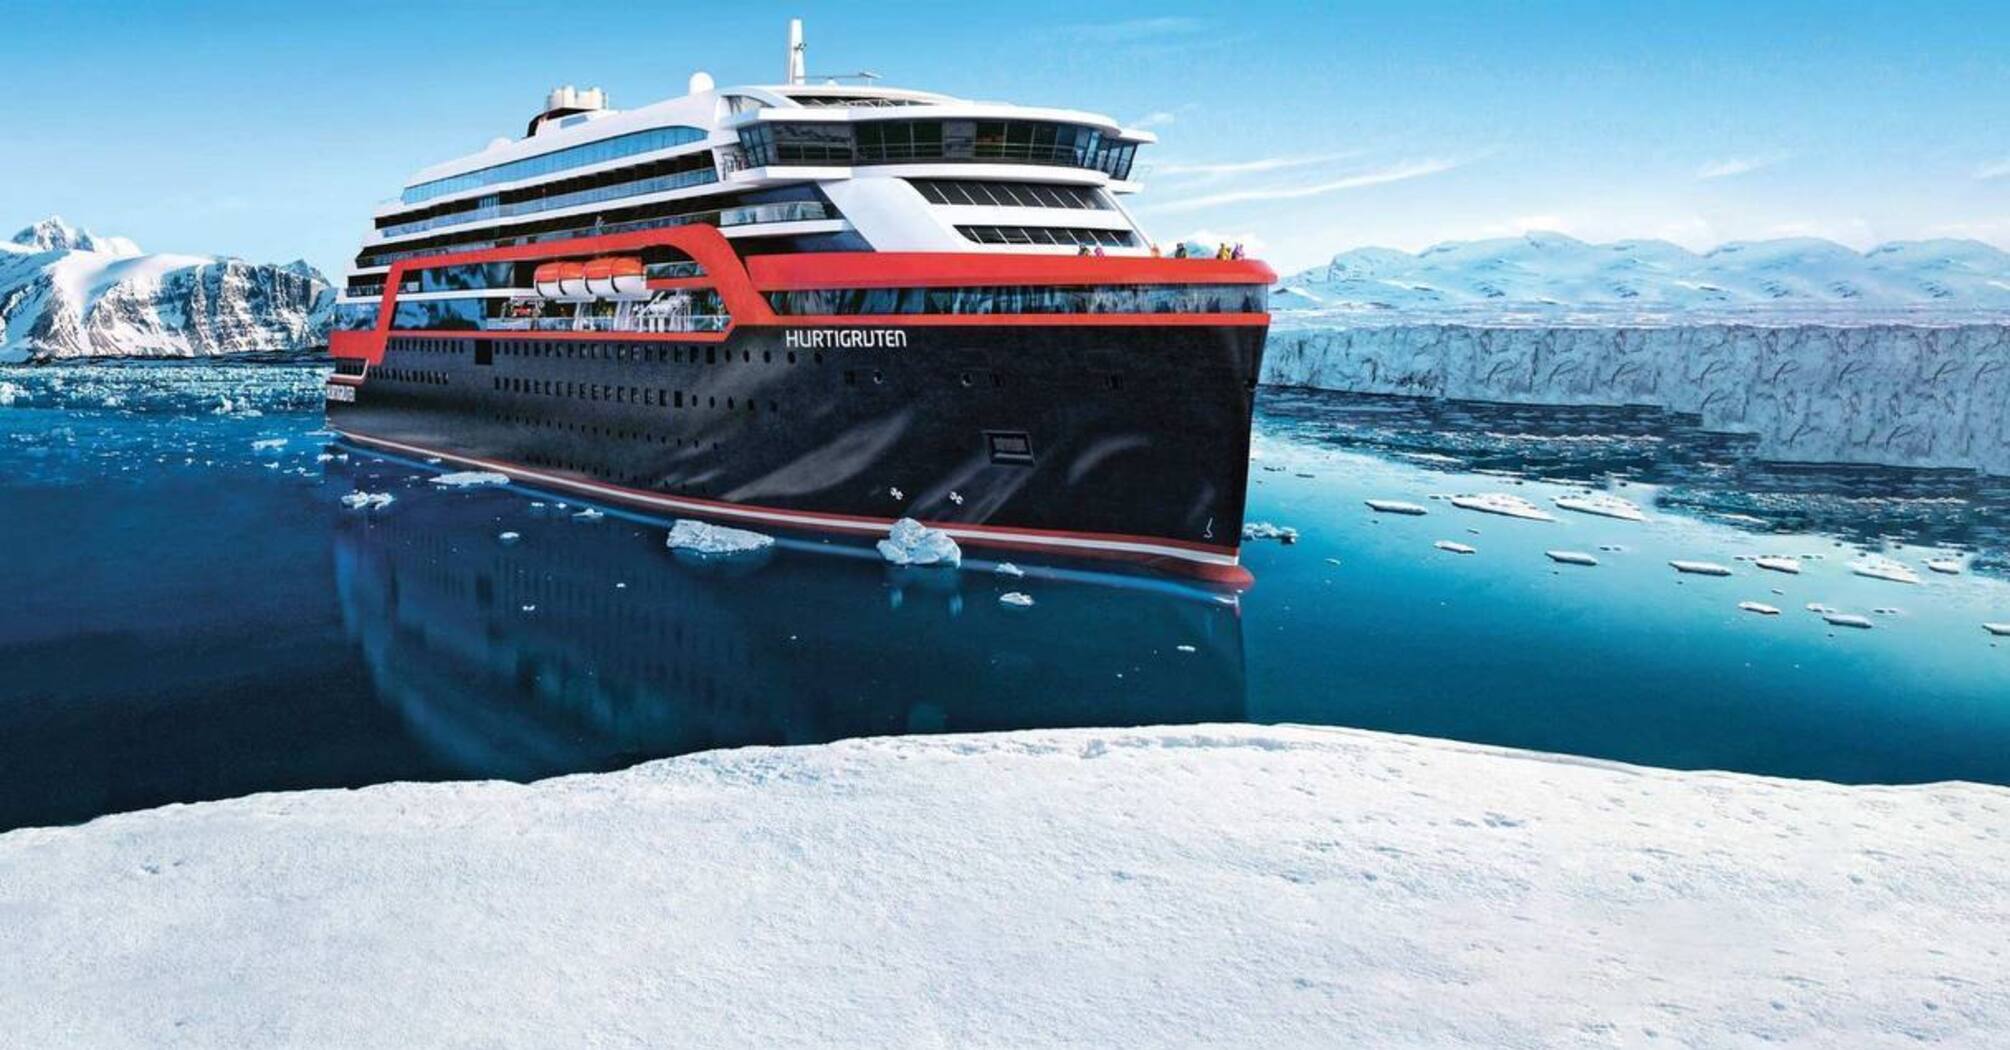 The expedition cruise company has made its voyages on an all-inclusive basis